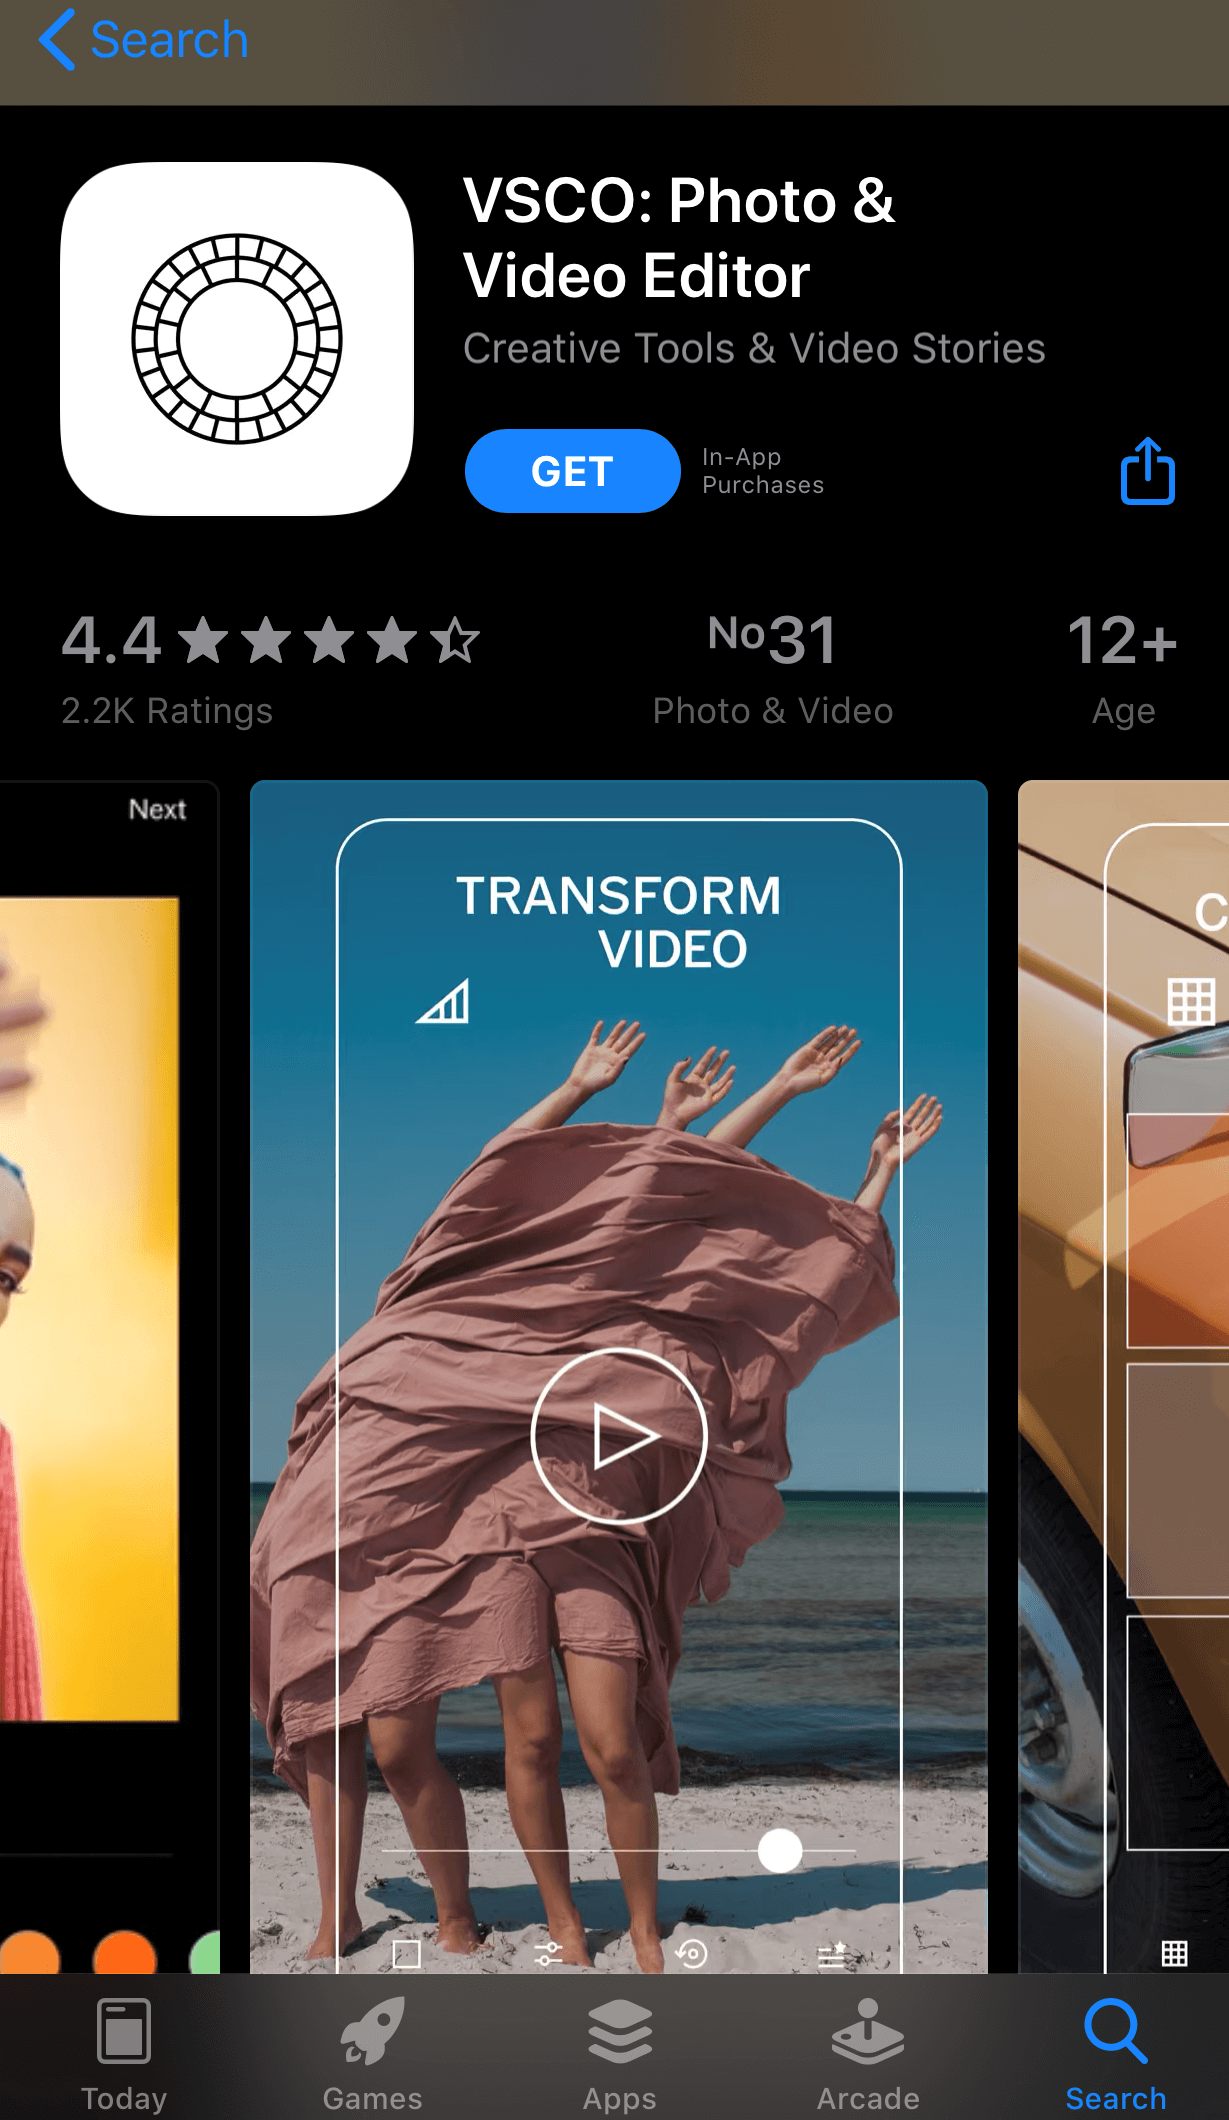 VSCO video and photo editing app from App Store.